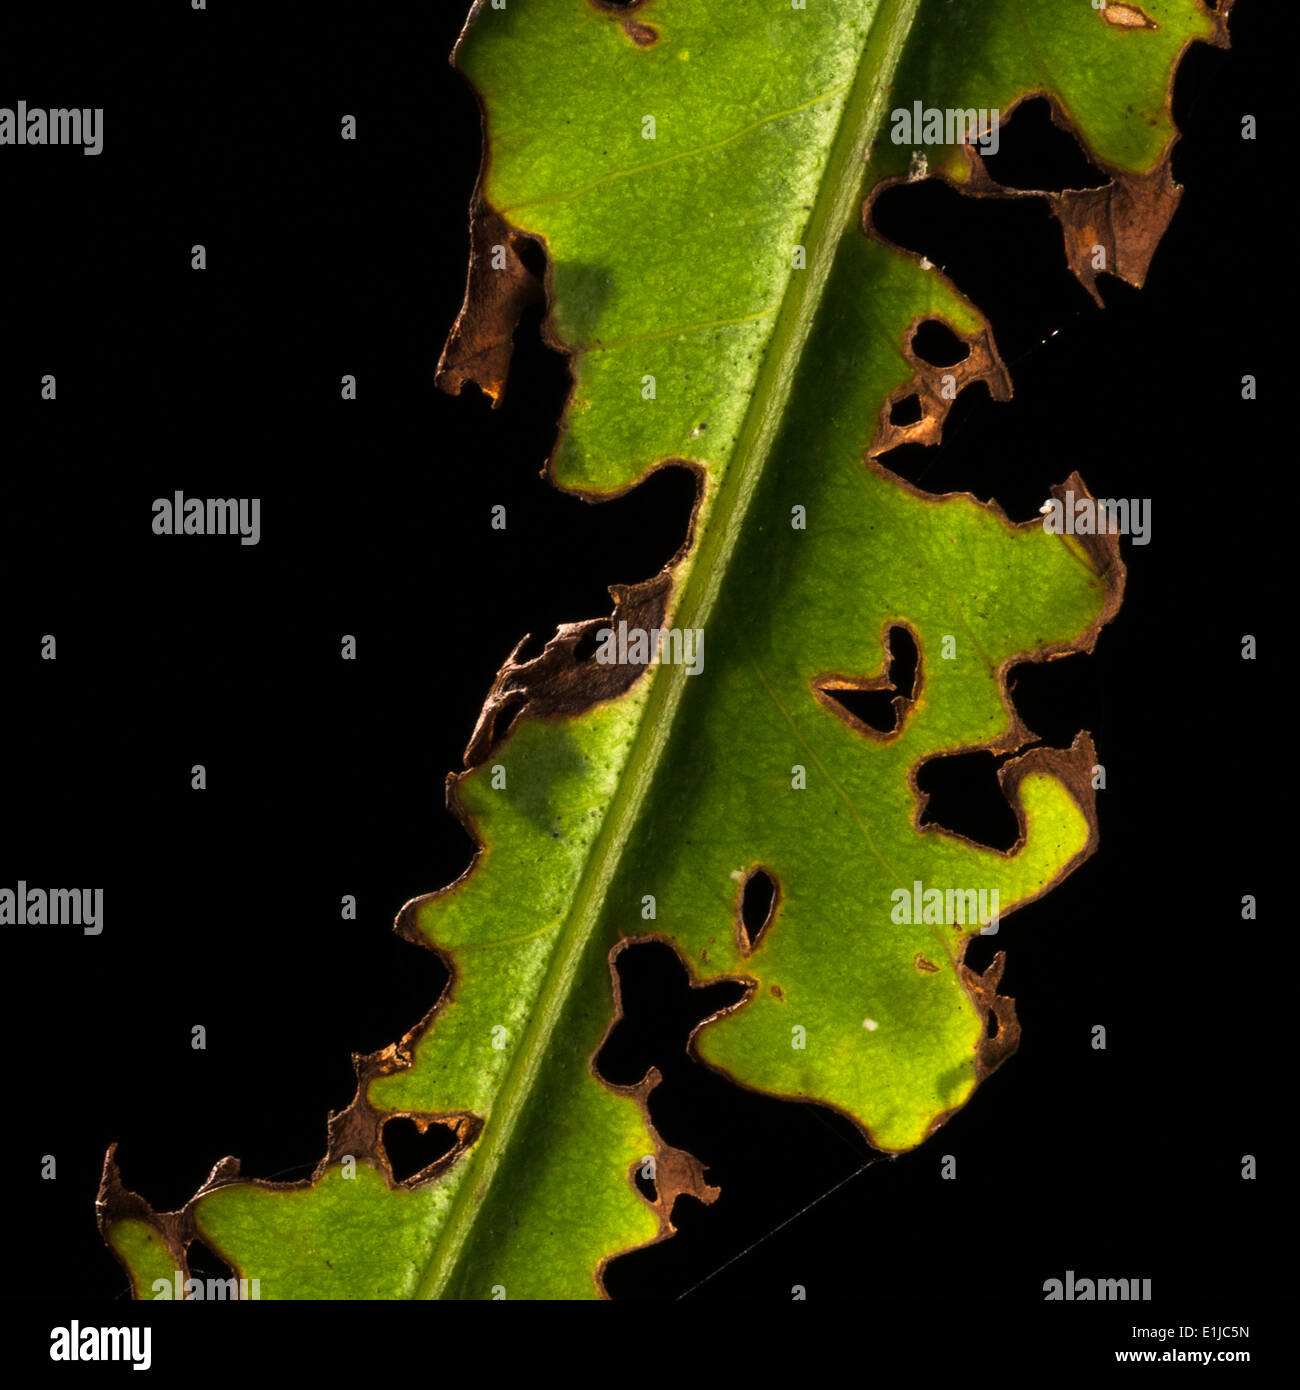 A green leaf damaged by insects Stock Photo